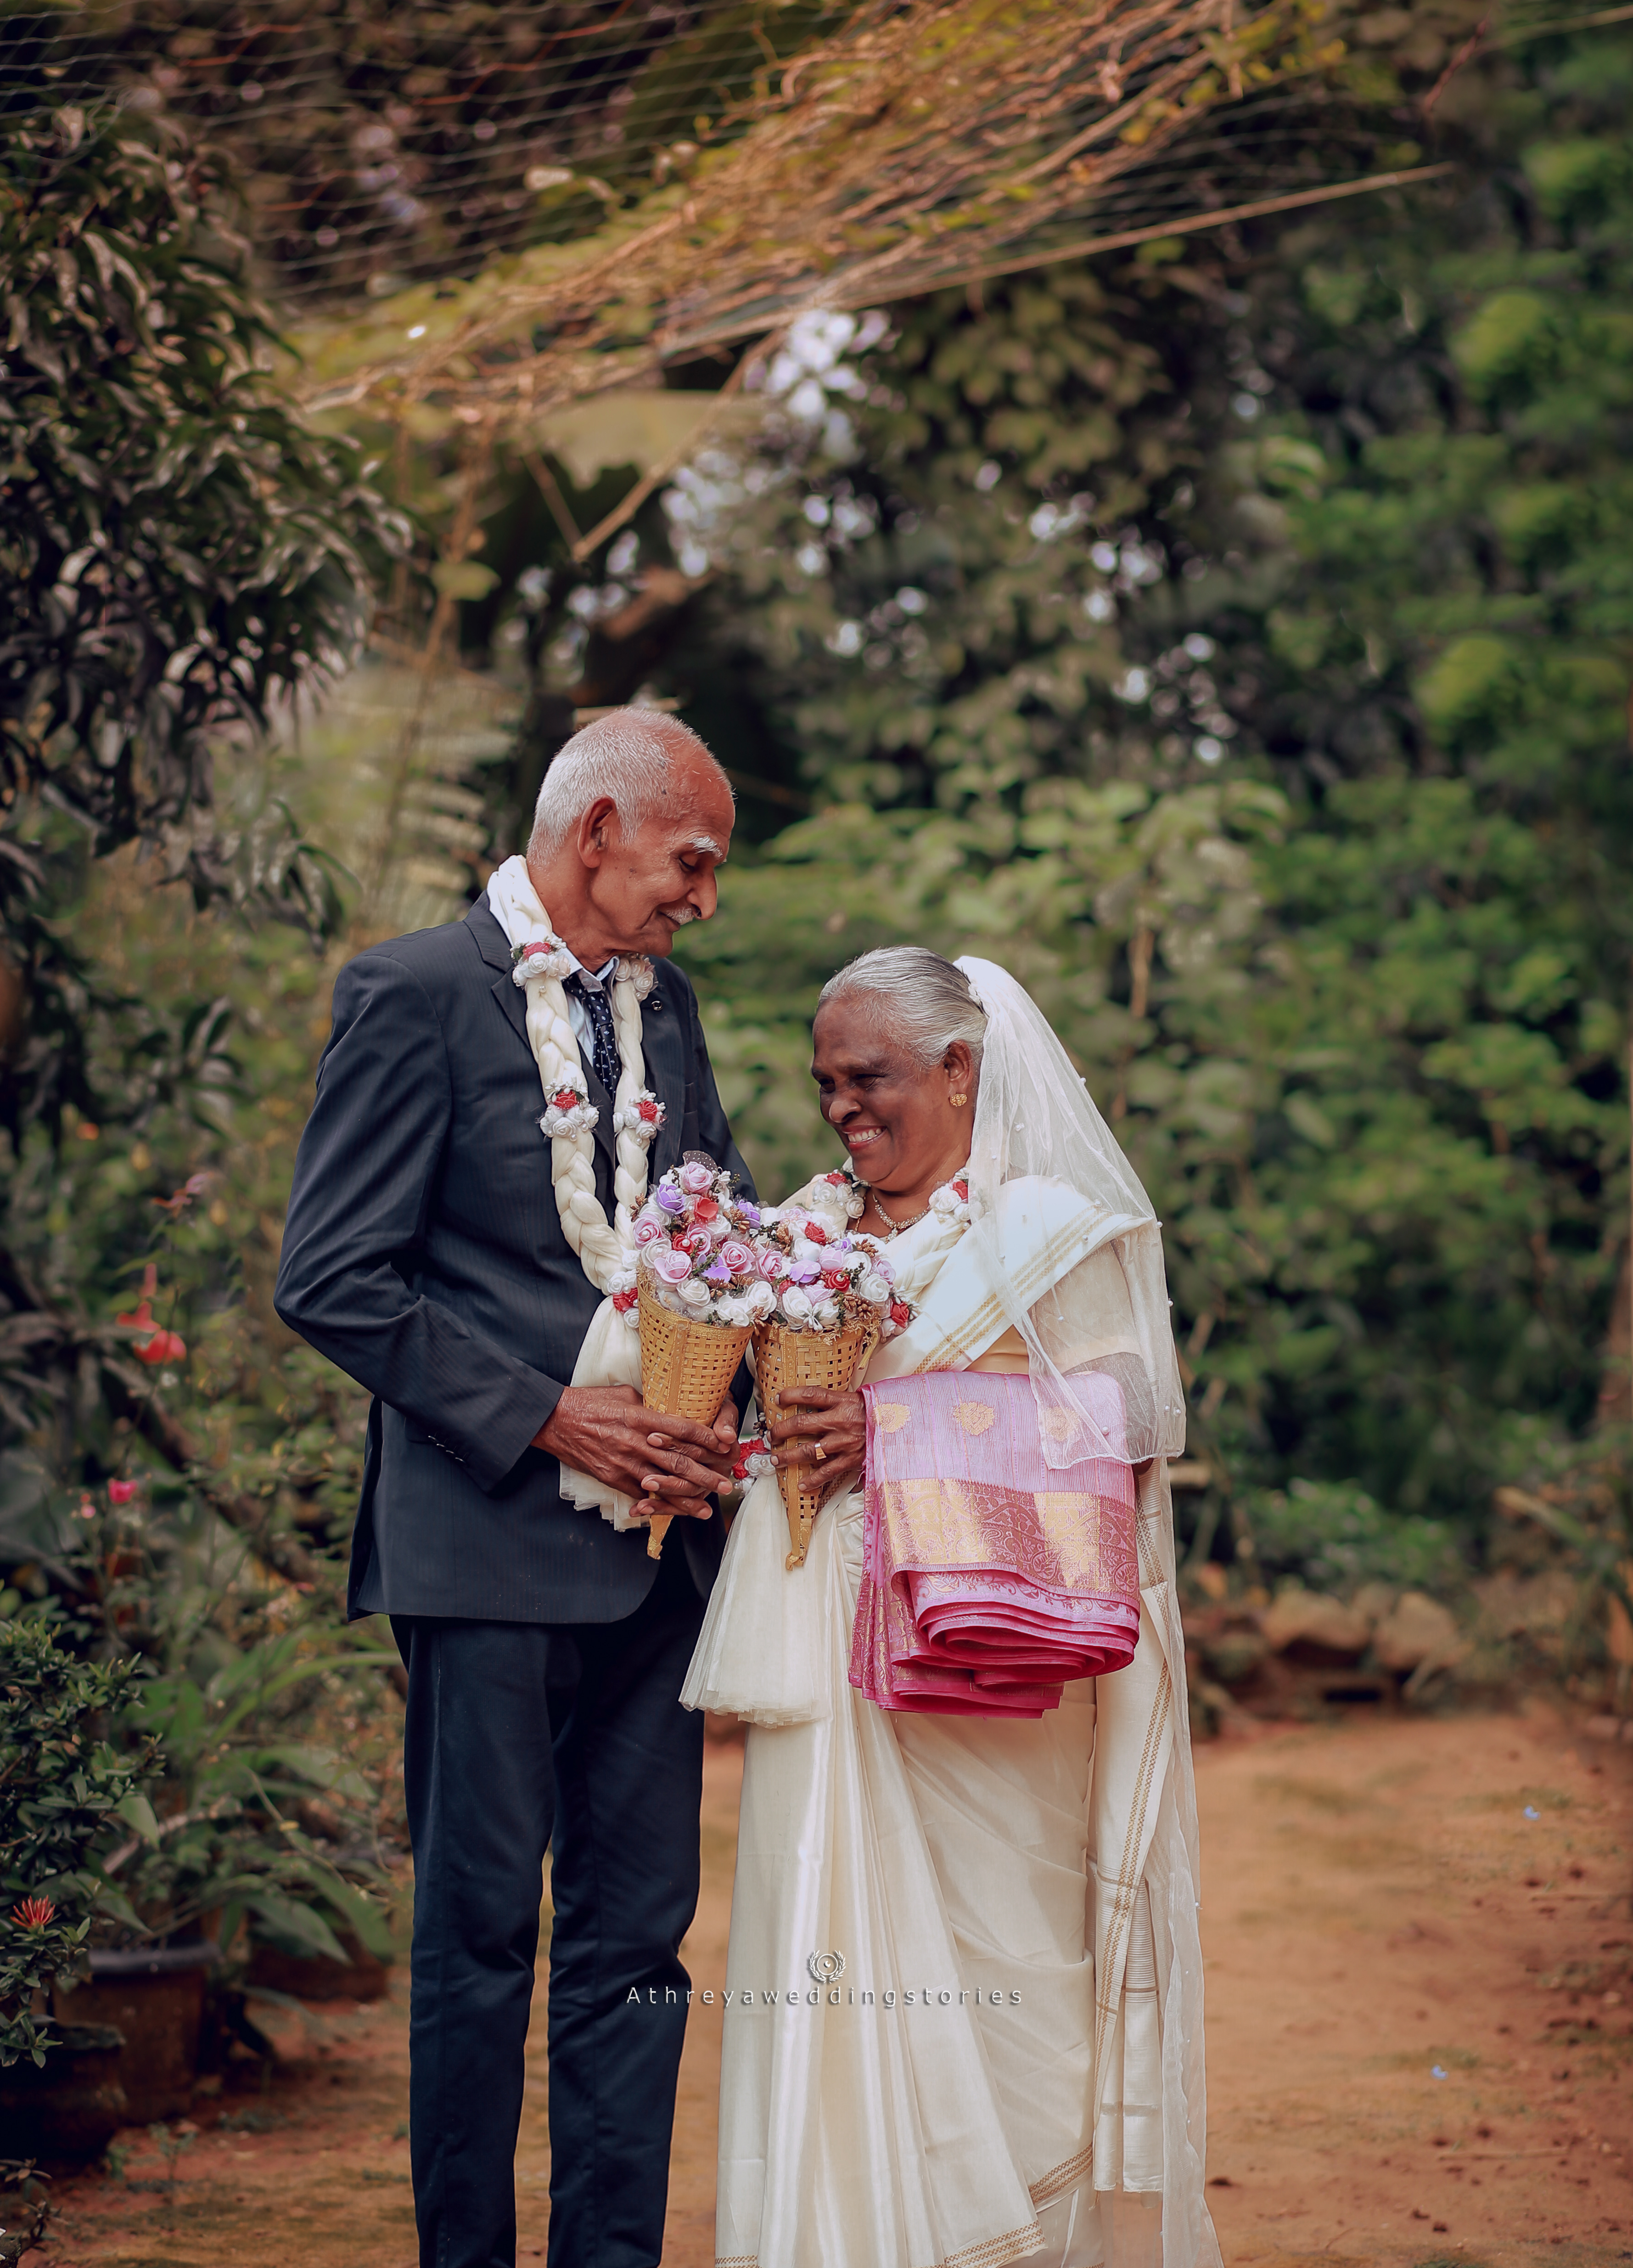 Kerala: Wedding photoshoot after 58 years of marriage goes viral